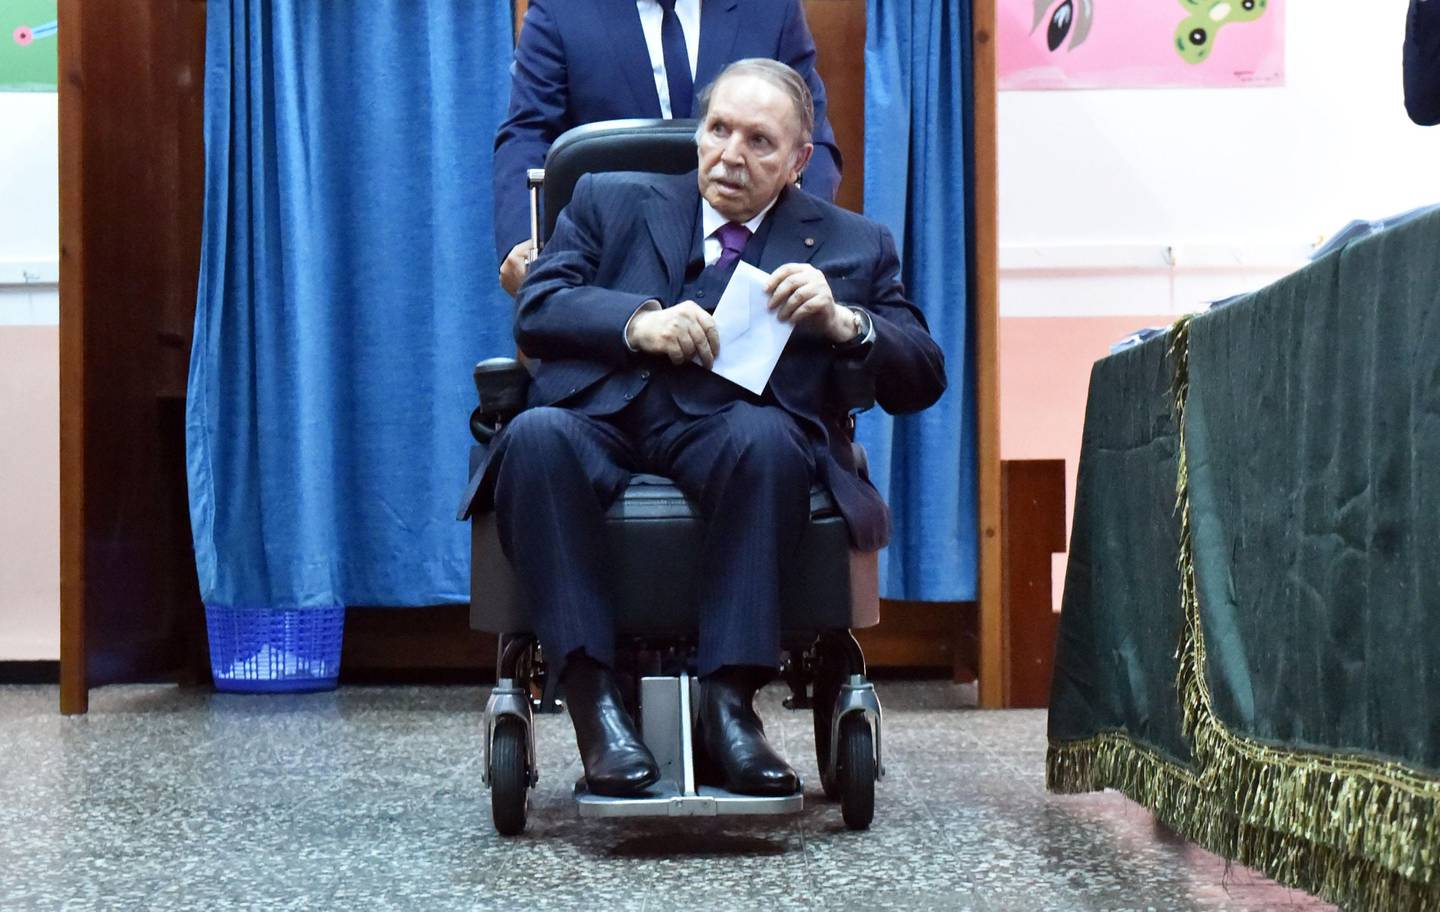 Algerian President Abdelaziz Bouteflika is seen on a wheelchair as he casts his vote at a polling station in Algiers on May 4, 2017 during parliamentary elections.
Algerians voted for a new parliament amid soaring unemployment and a deep financial crisis caused by a collapse in oil revenues. / AFP PHOTO / RYAD KRAMDI